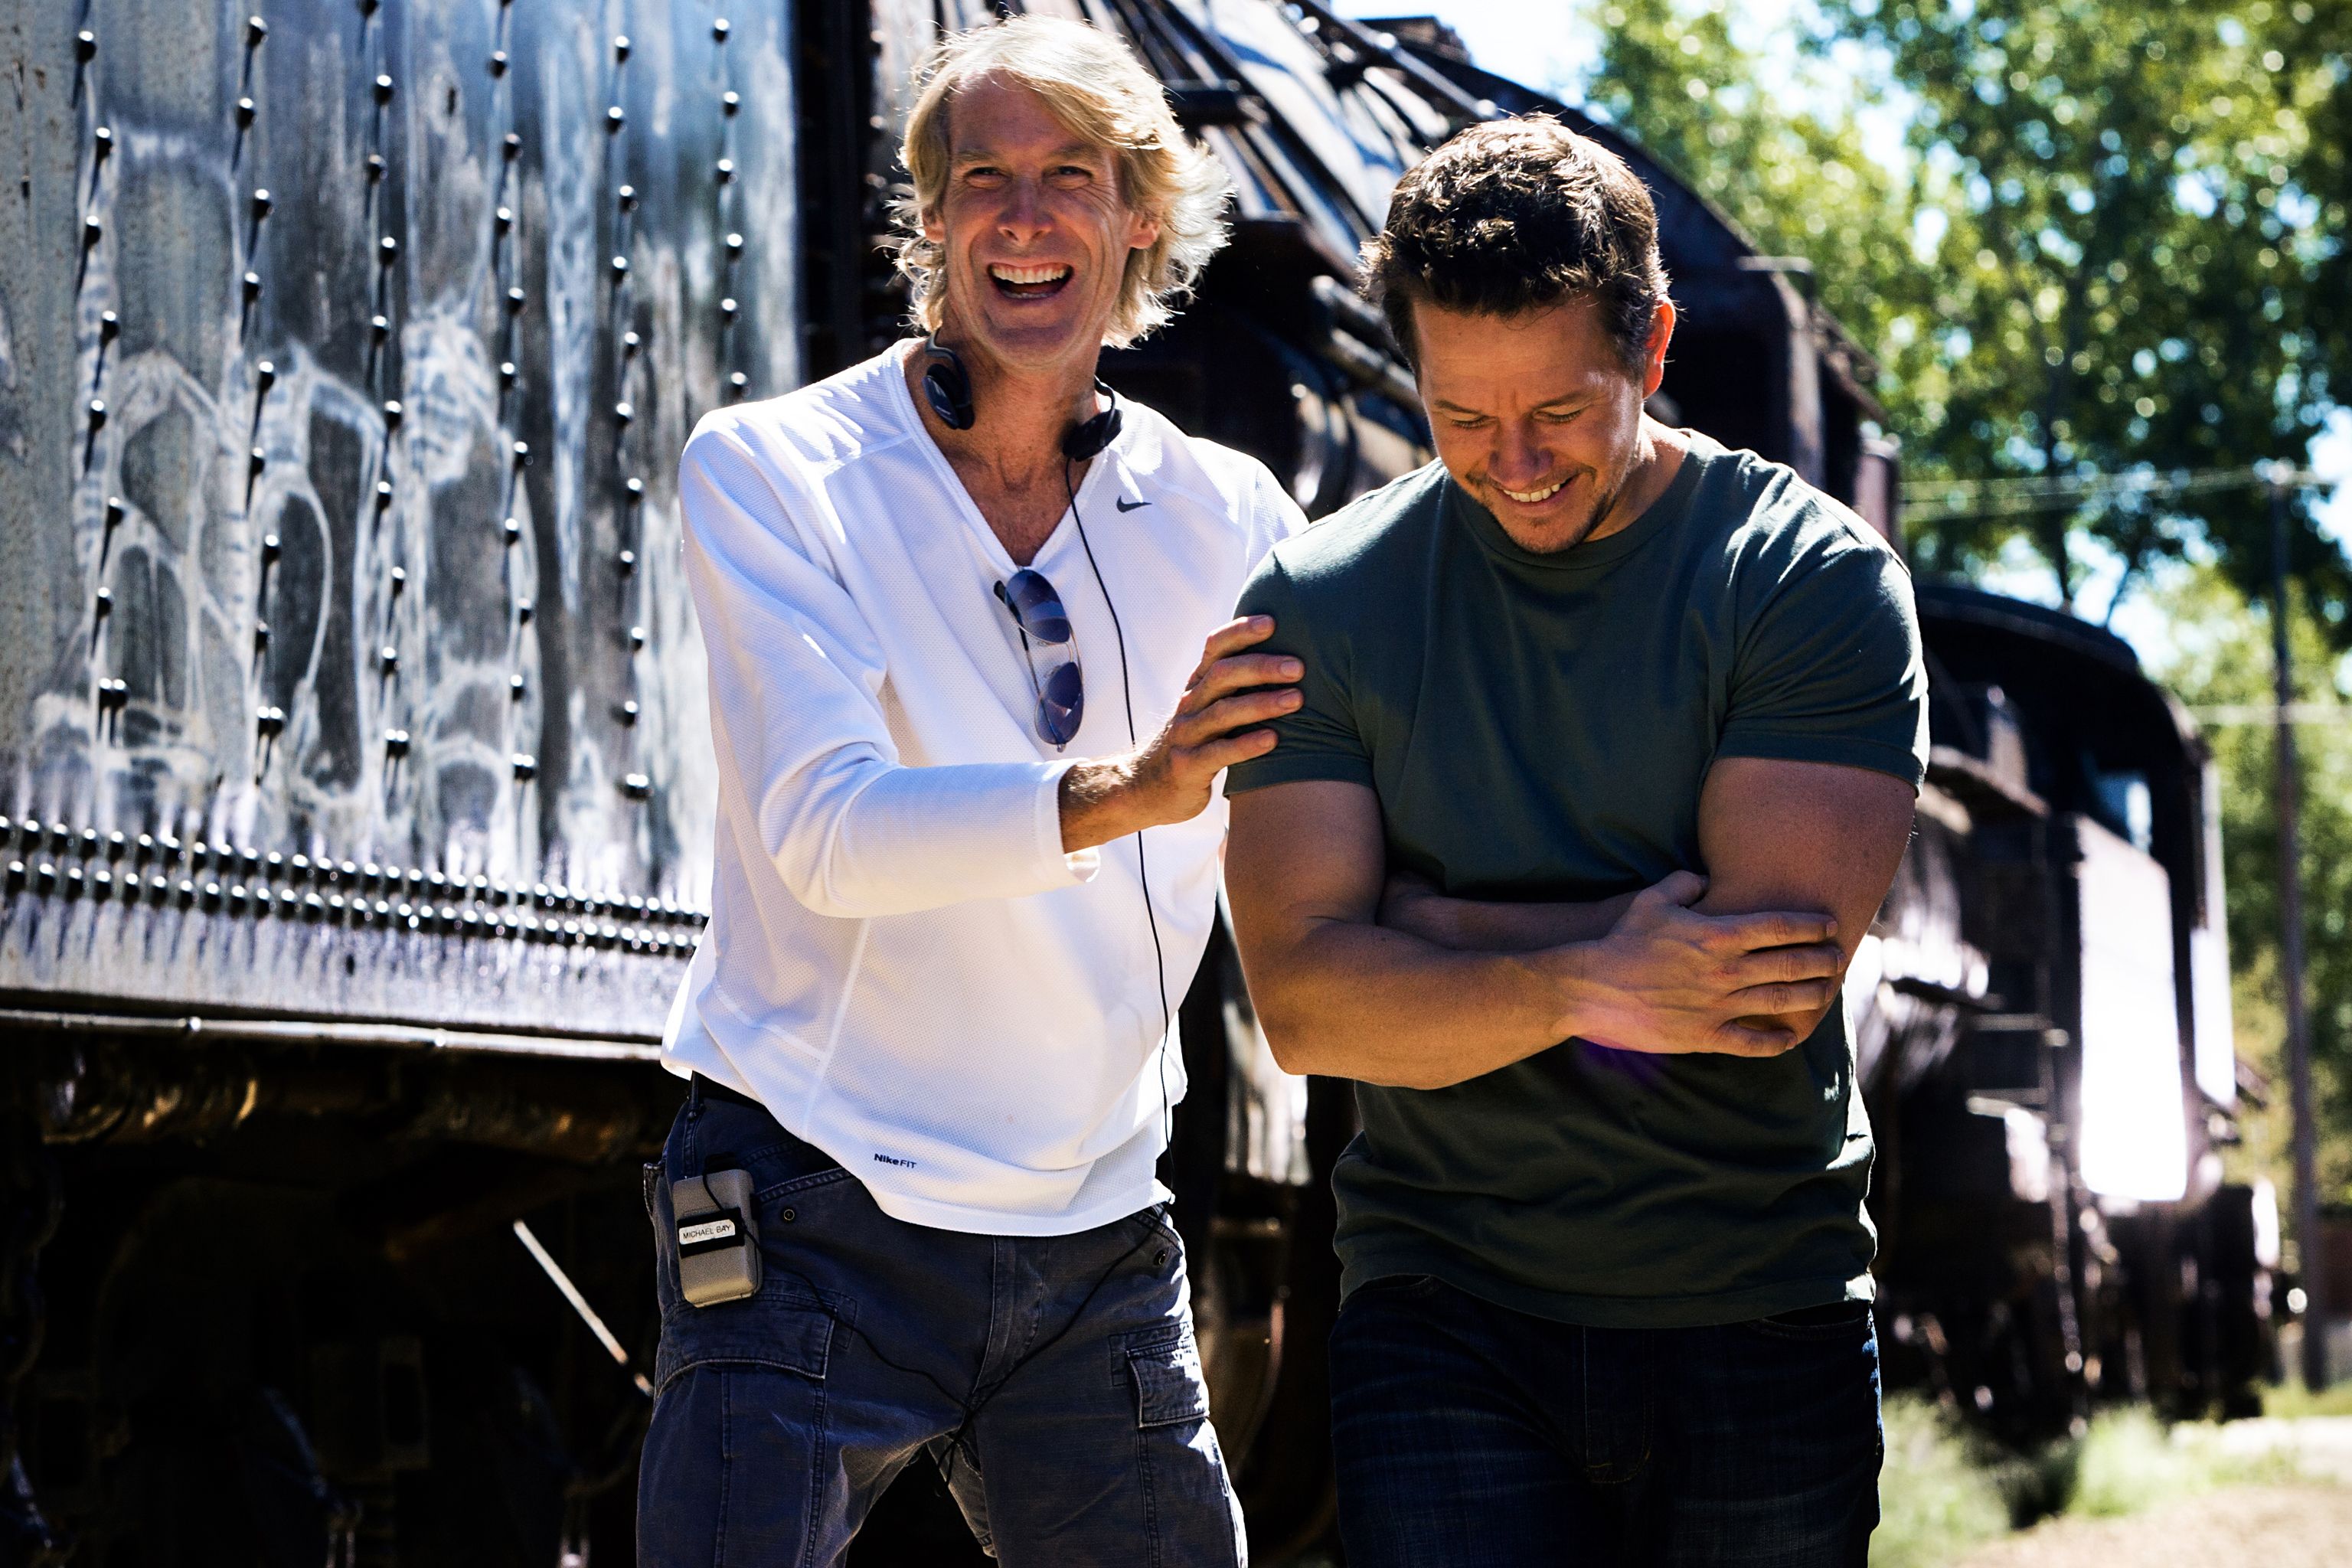 Michael Bay Reveals His Medieval Cast in New 'Transformers: The Last Knight' Set Videos - Collider.com